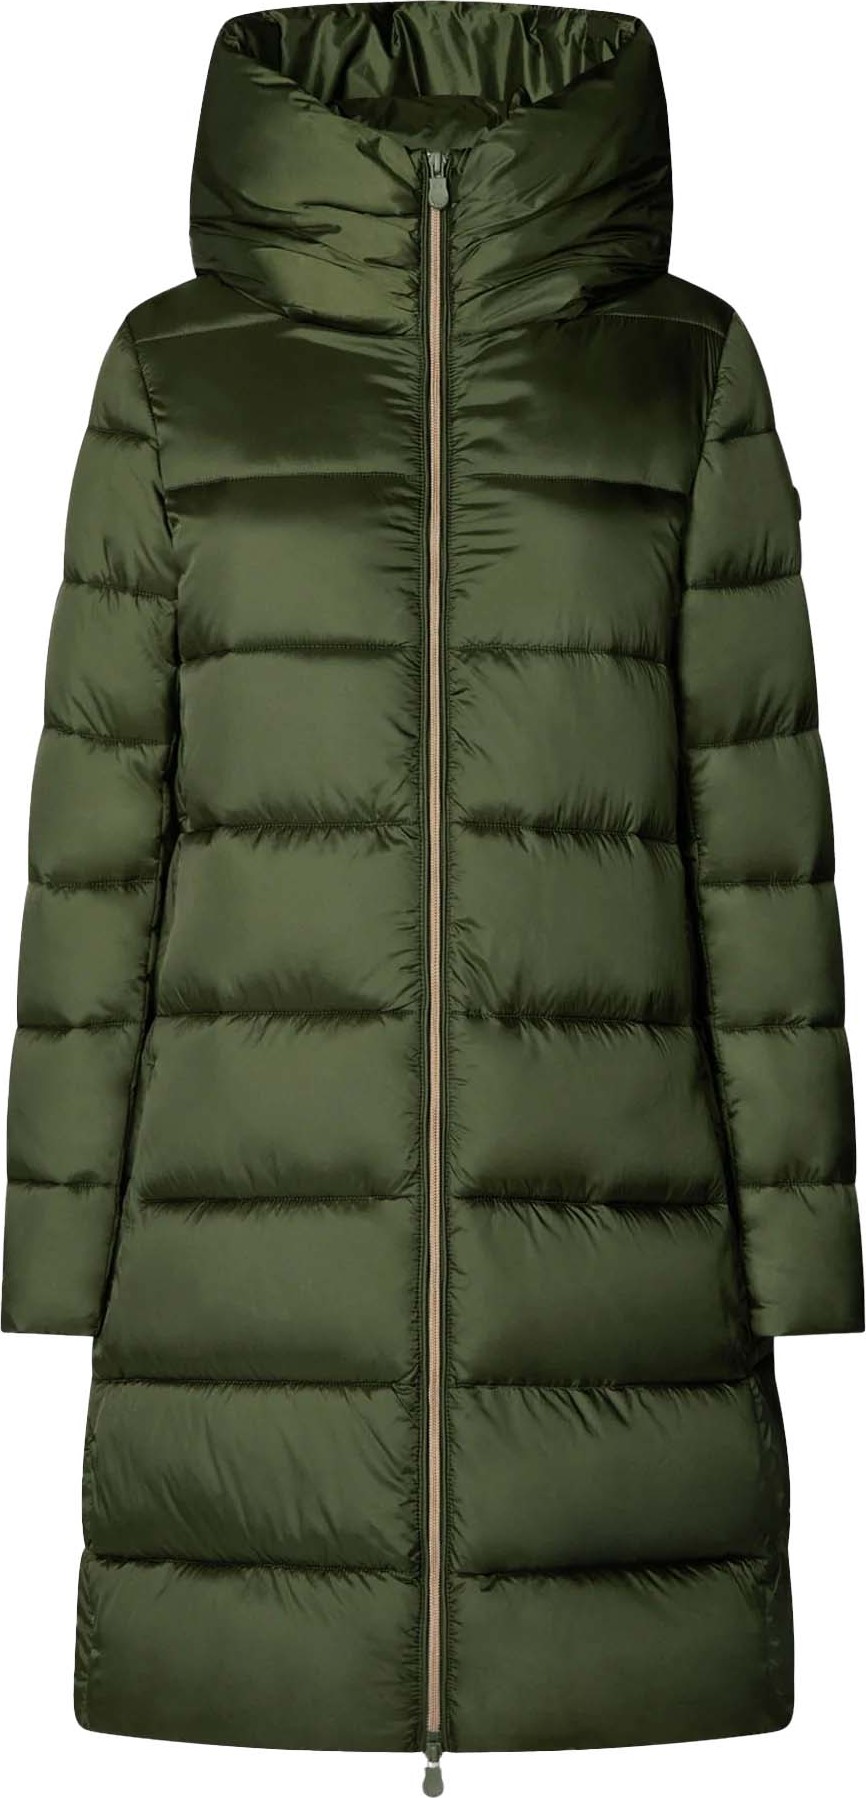 Save the Duck Women's Animal Free Hooded Puffer Jacket Lysa Pine Green M/L, Pine Green